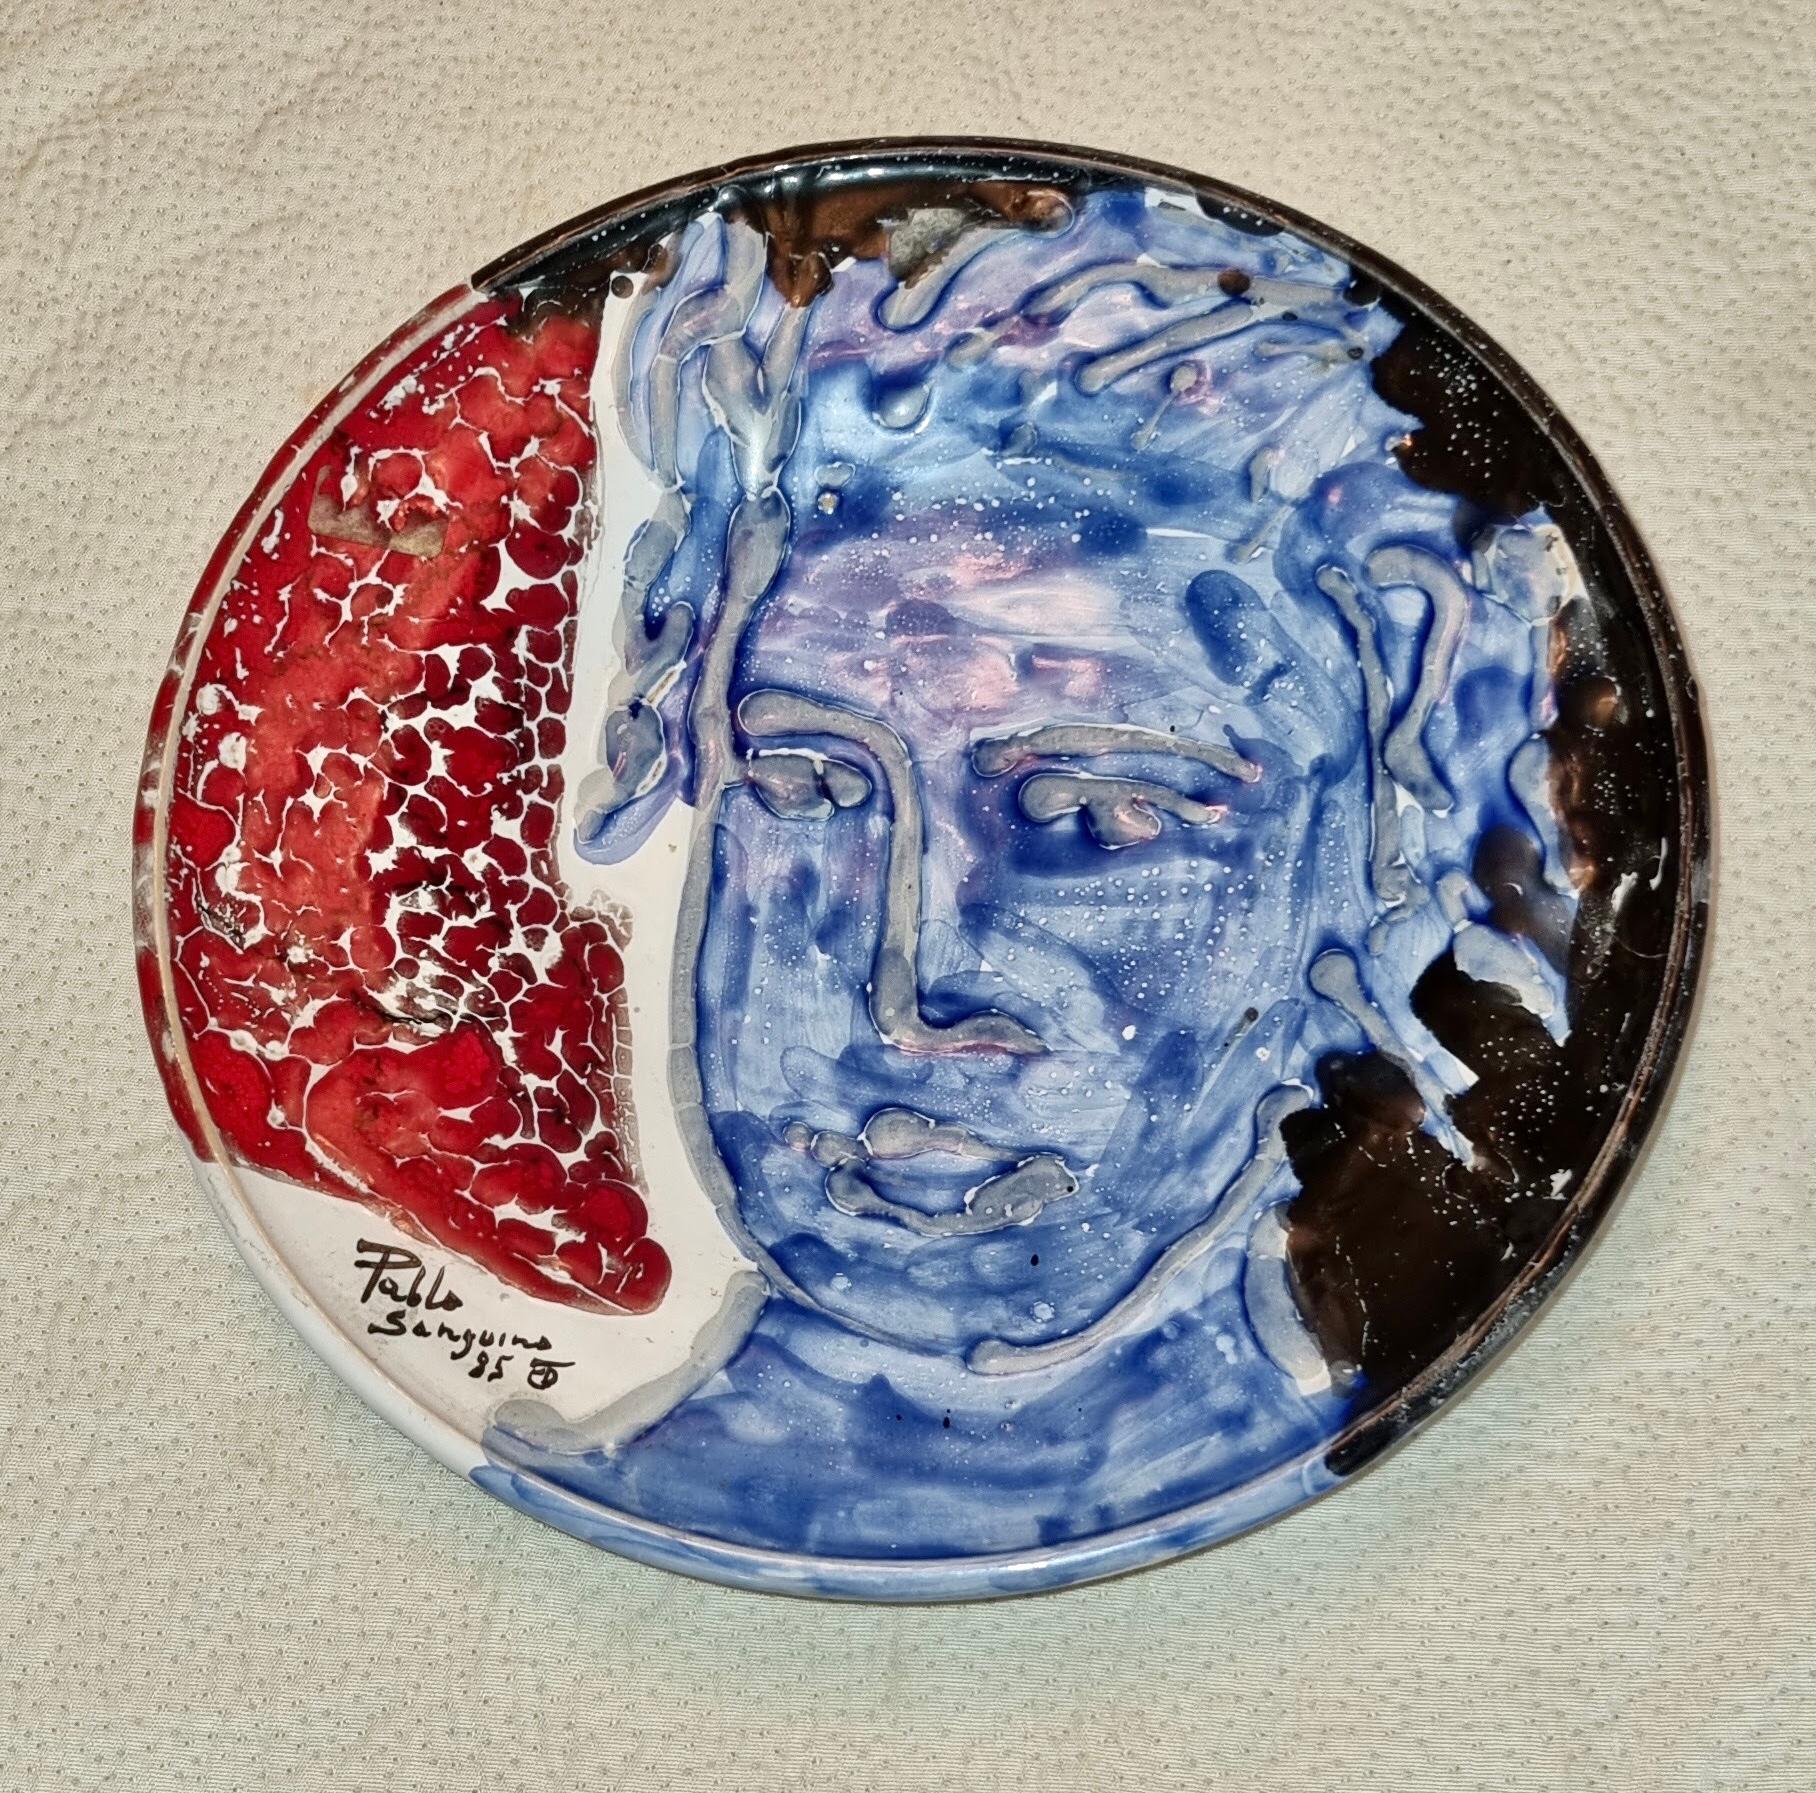 Ceramic plate with painting of a mans face in surreal mediterranean style
by Toledian artis Pablo Sanguino
Pablo Sanguino, born in 1949 in Puente del Arzobispo, belongs to a tradition of potters who ended up settling in Toledo in 1955, in a